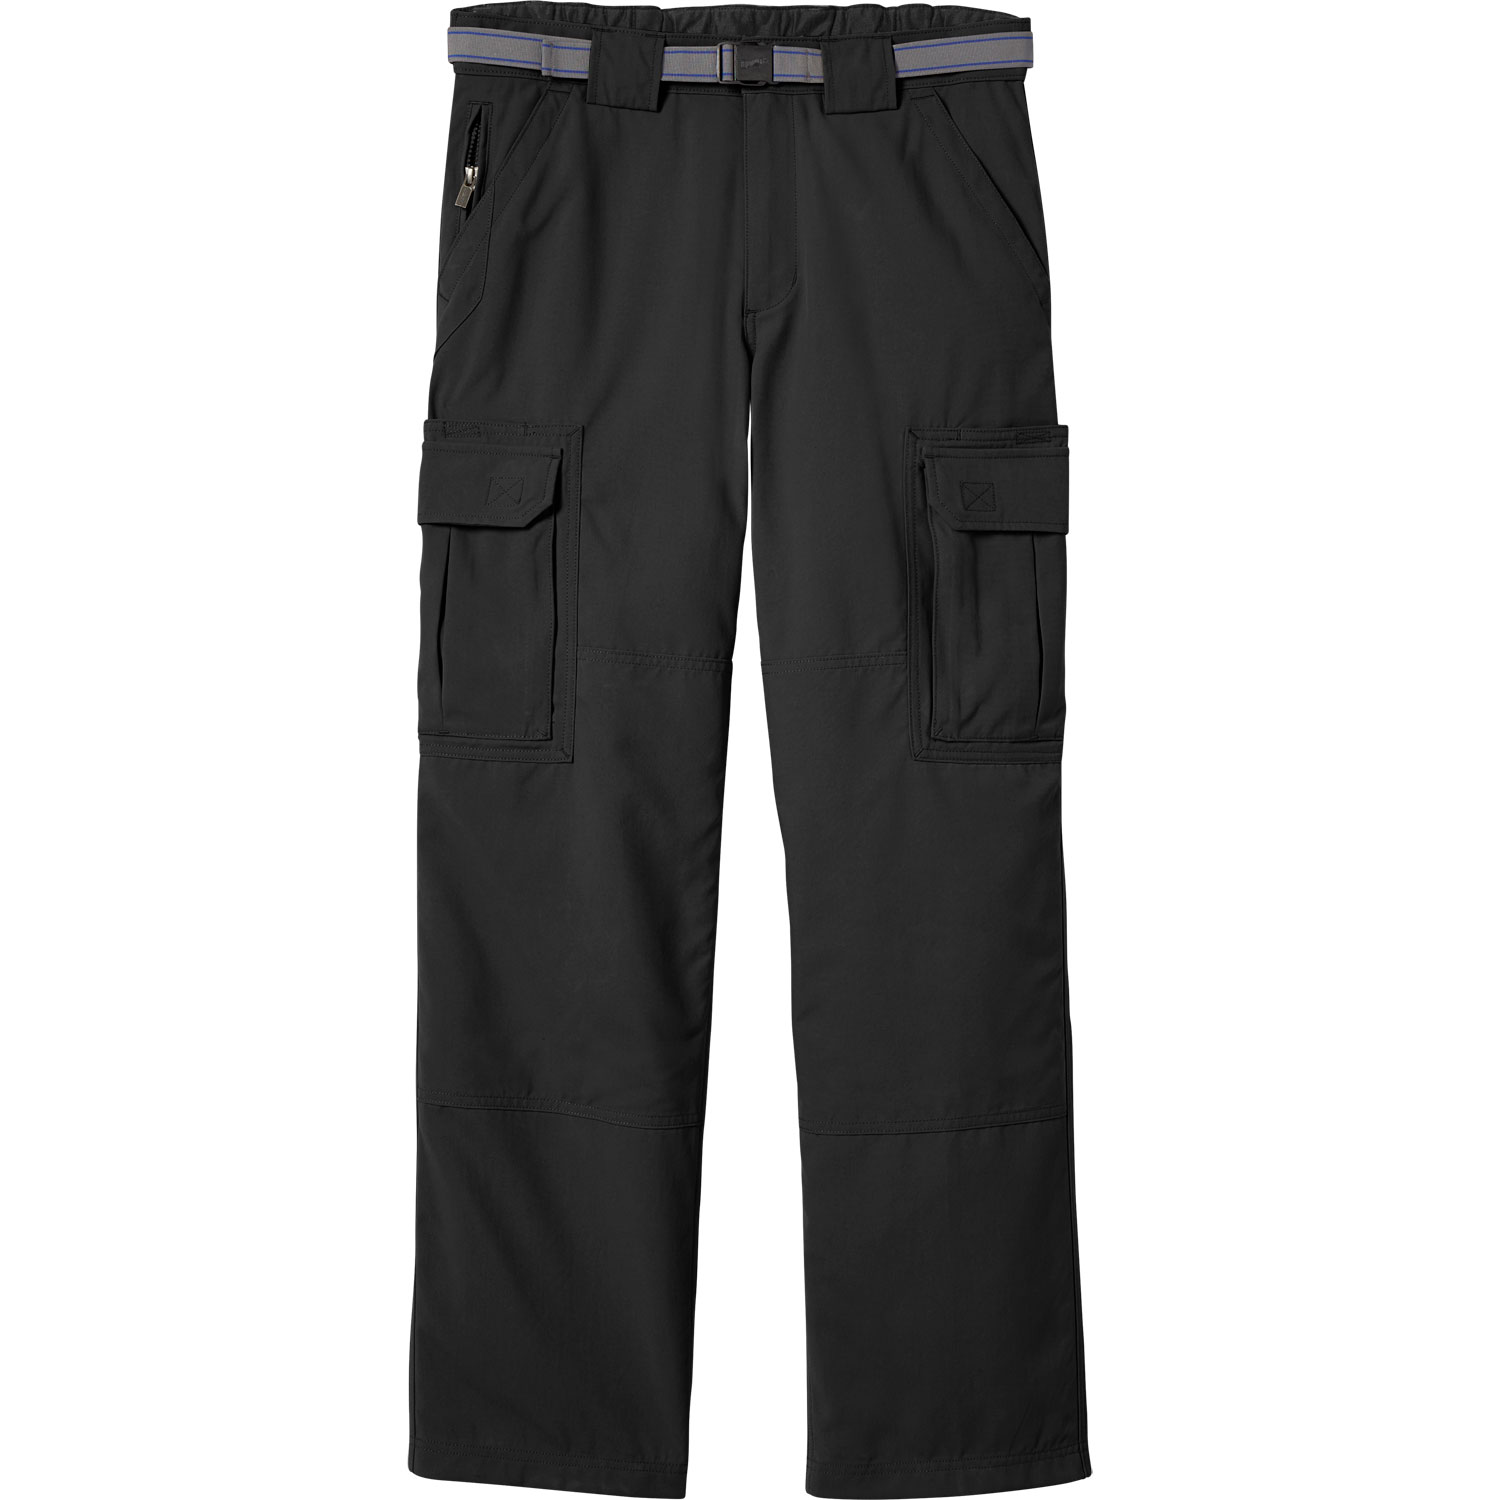 Men's Original Dry on the Fly Relaxed Fit Cargo Pants | Duluth Trading ...